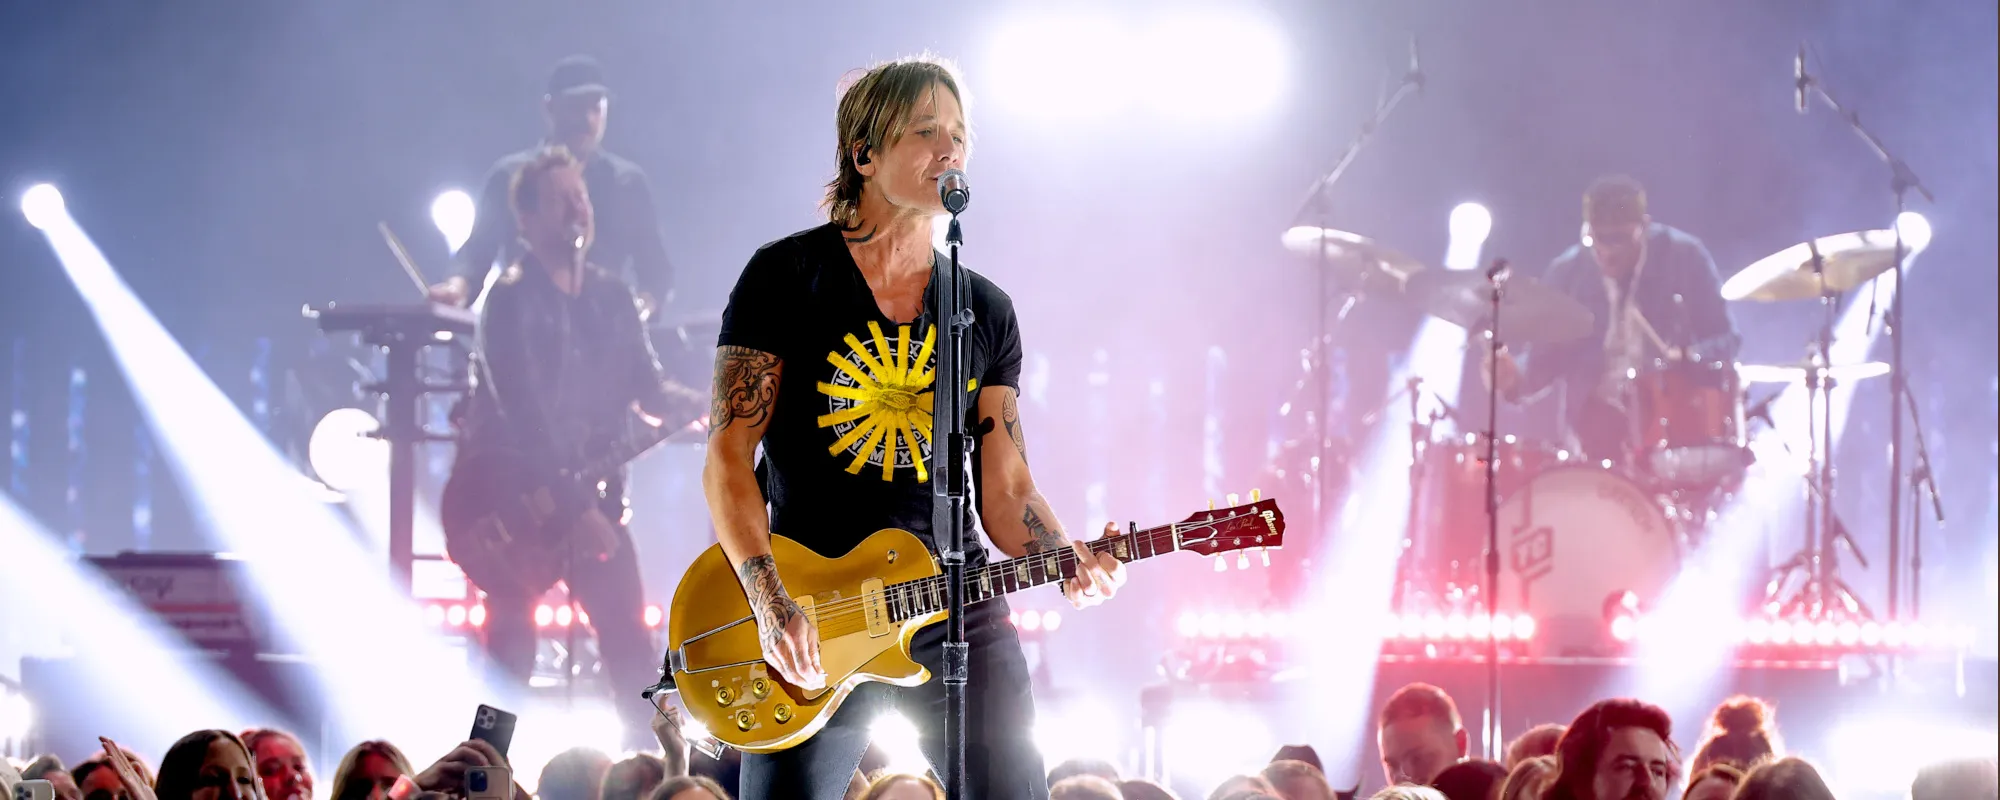 Keith Urban Says Taylor Swift’s Eras Tour is The “Best of the Best”